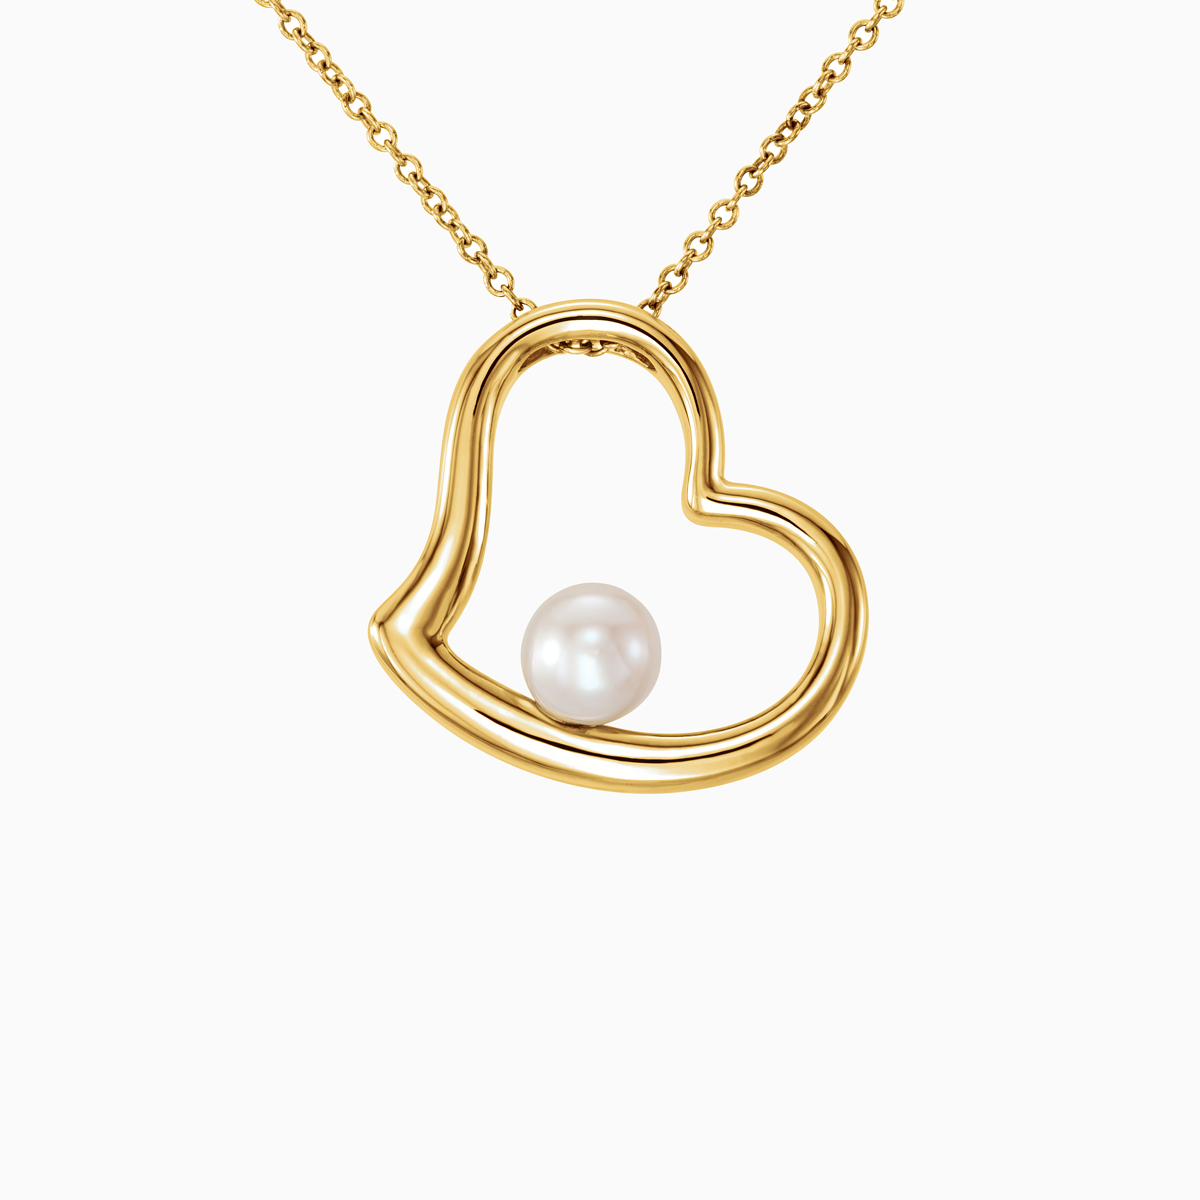 Freshwater Pearl Open Heart Necklace, 18 inches, 14k Gold